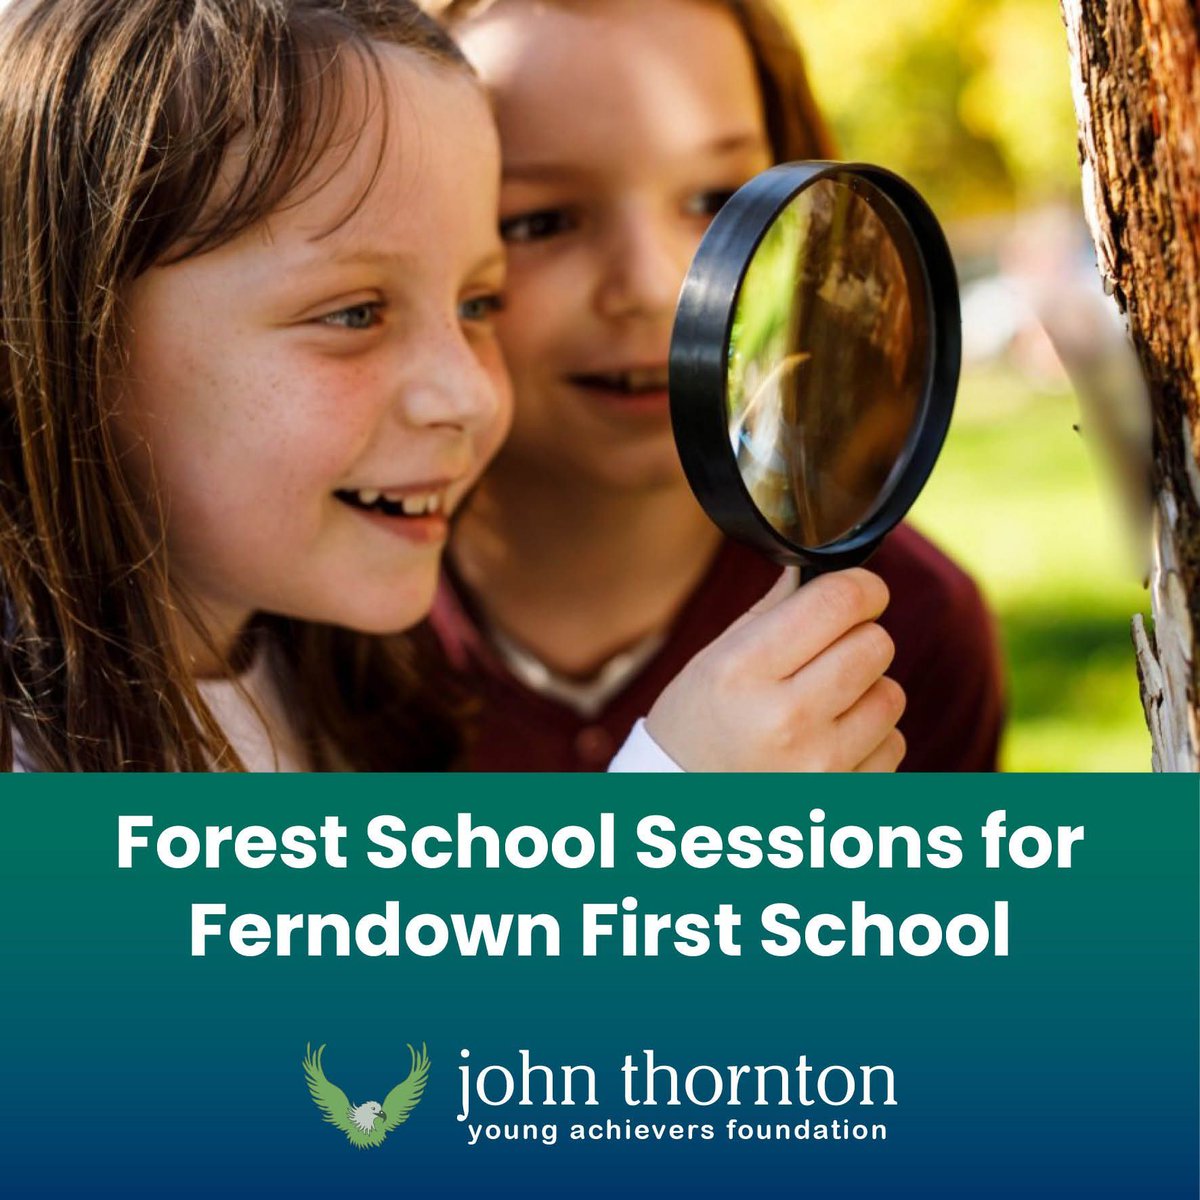 The JTYAF has funded 10 weeks of 2-hour Forest School sessions for Ferndown First School 🌳 buff.ly/433yeYo #ForestSchool #Charity #JTYAF #Dorset